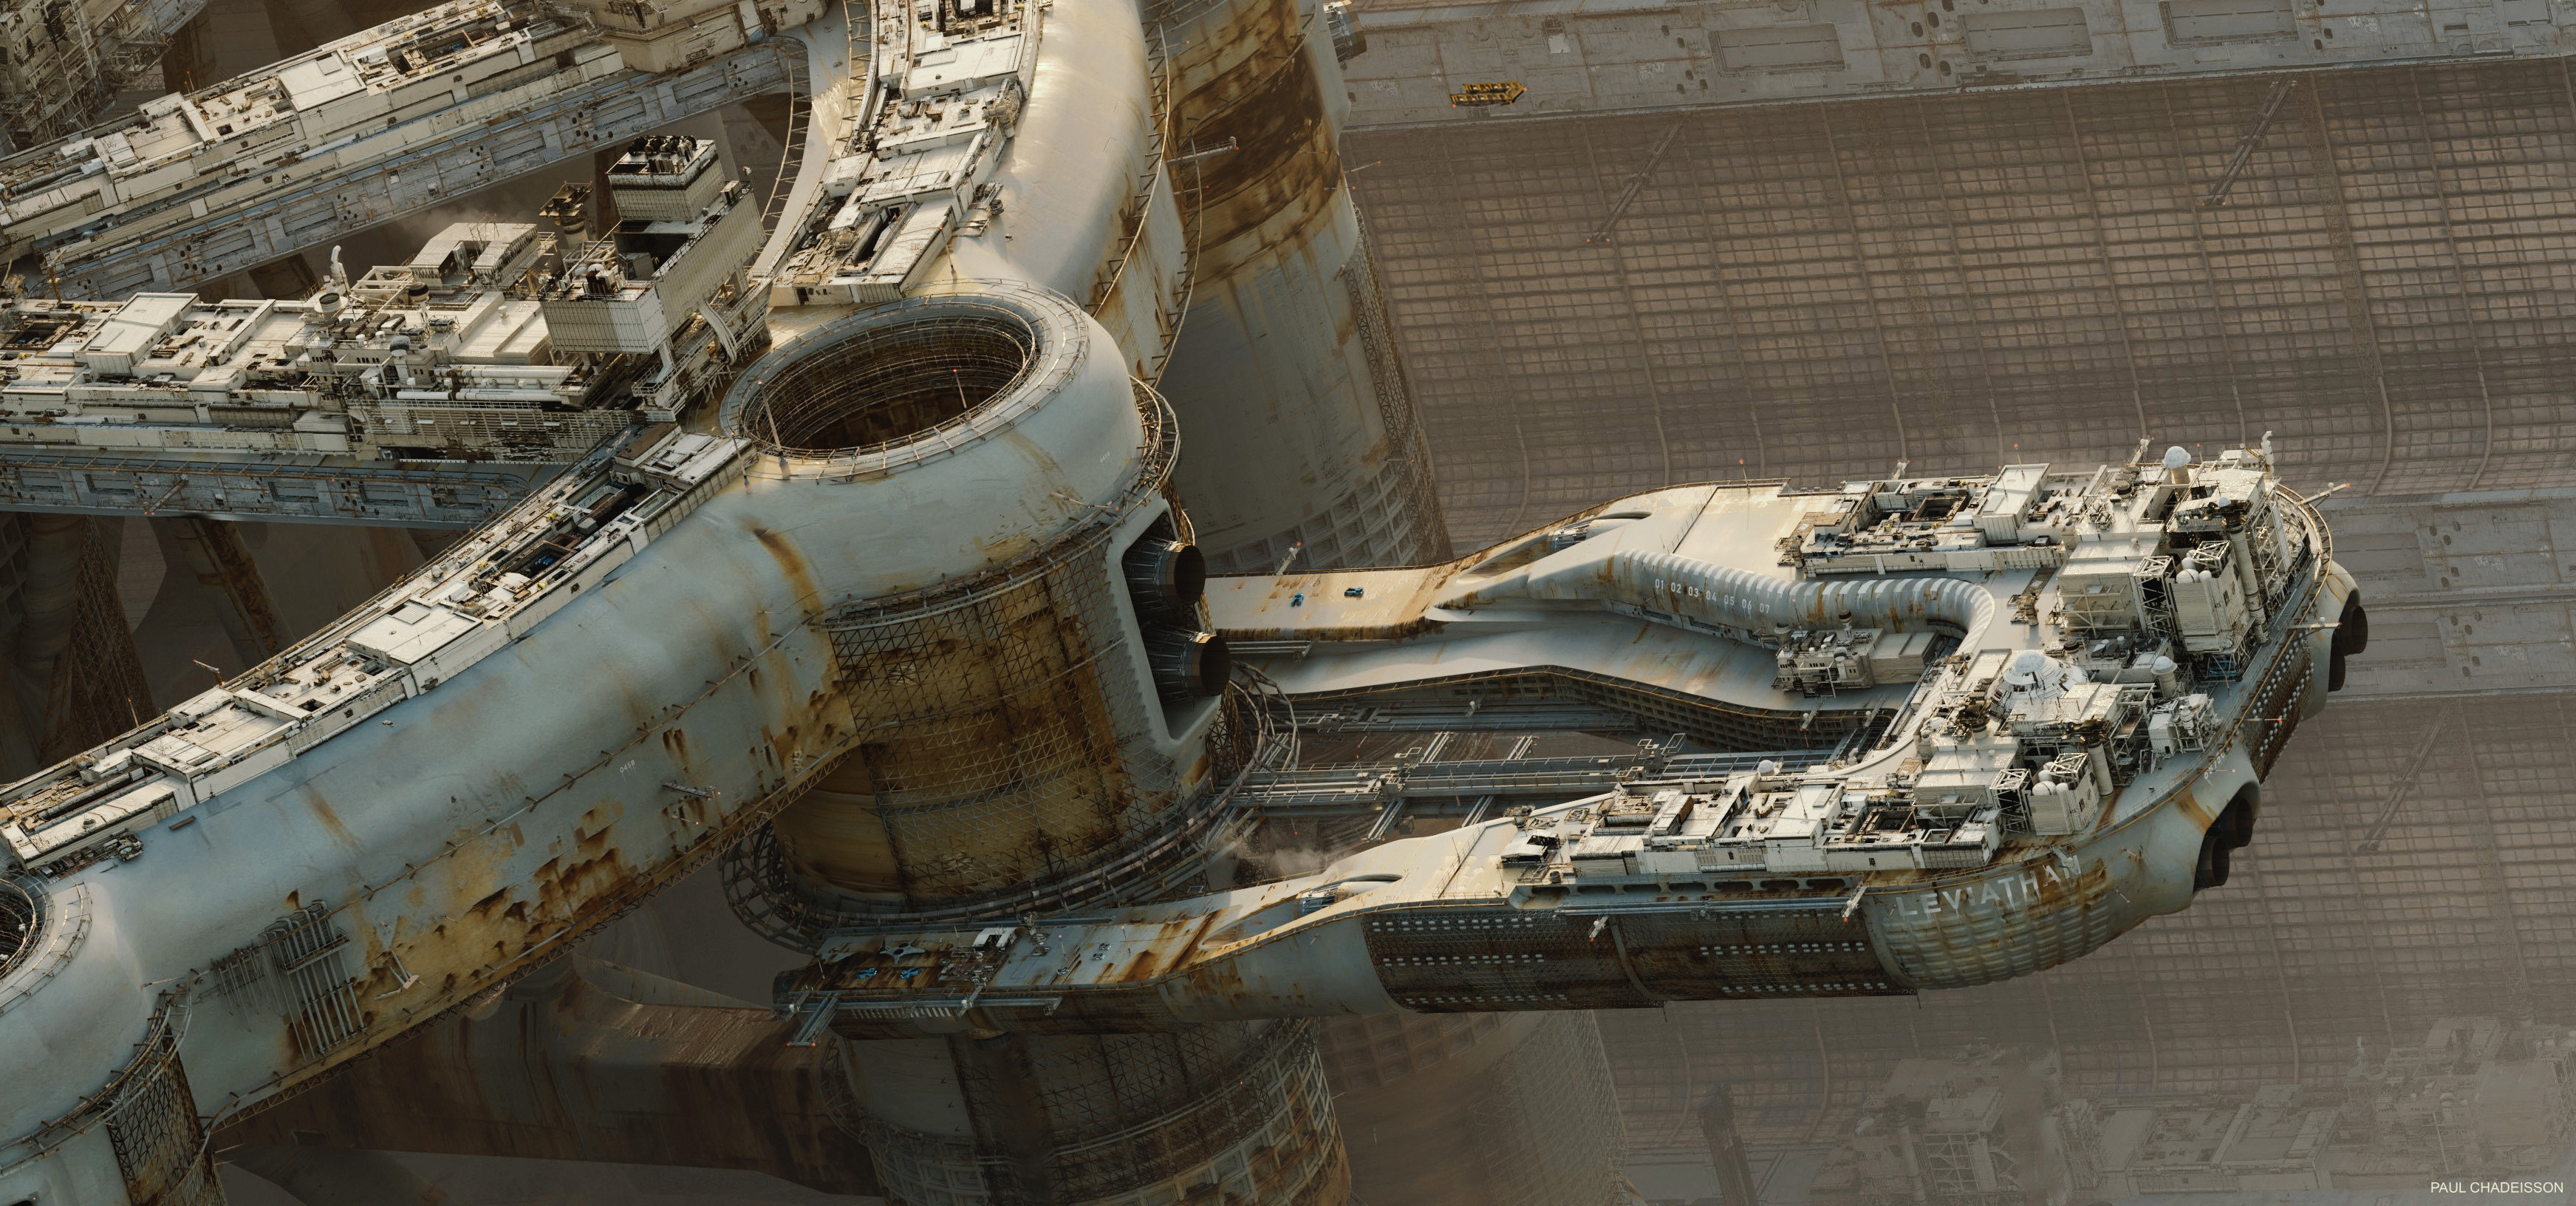 General 3487x1632 Paul Chadeisson digital art CGI construction ship solstice 5 detailed artwork planet science fiction oil rig watermarked